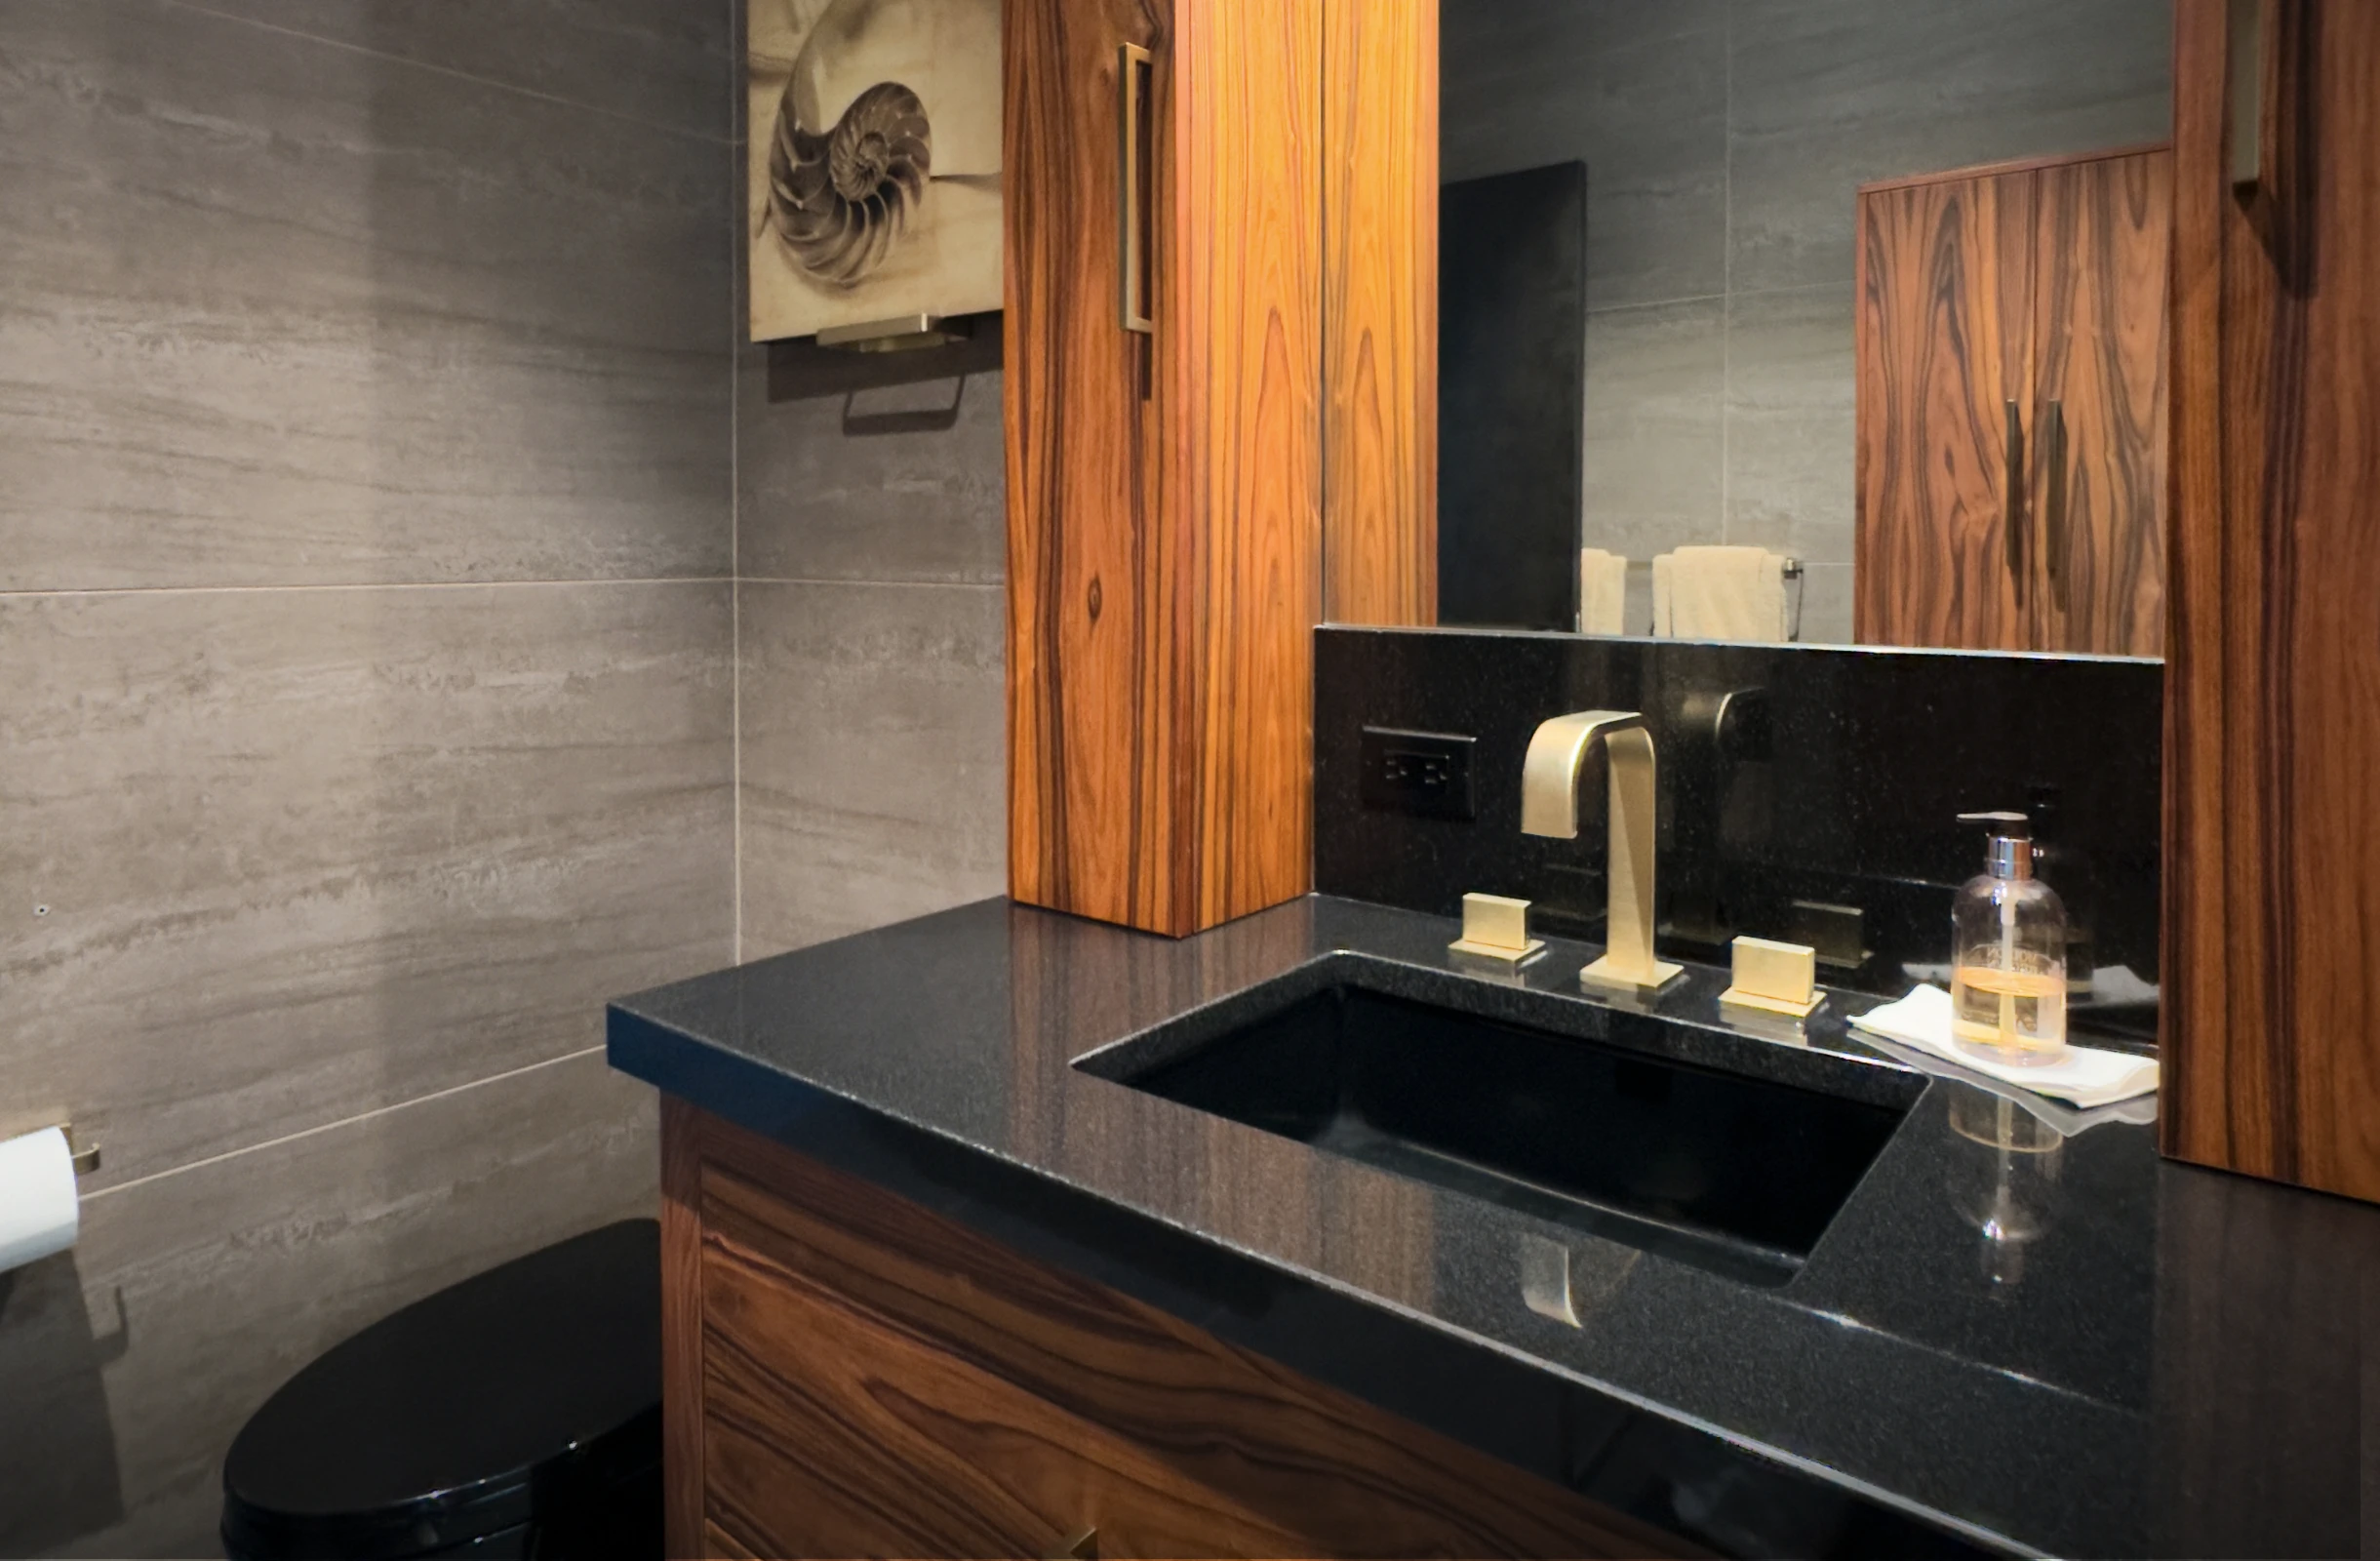 Travertine wall tiles and tall side cabinets